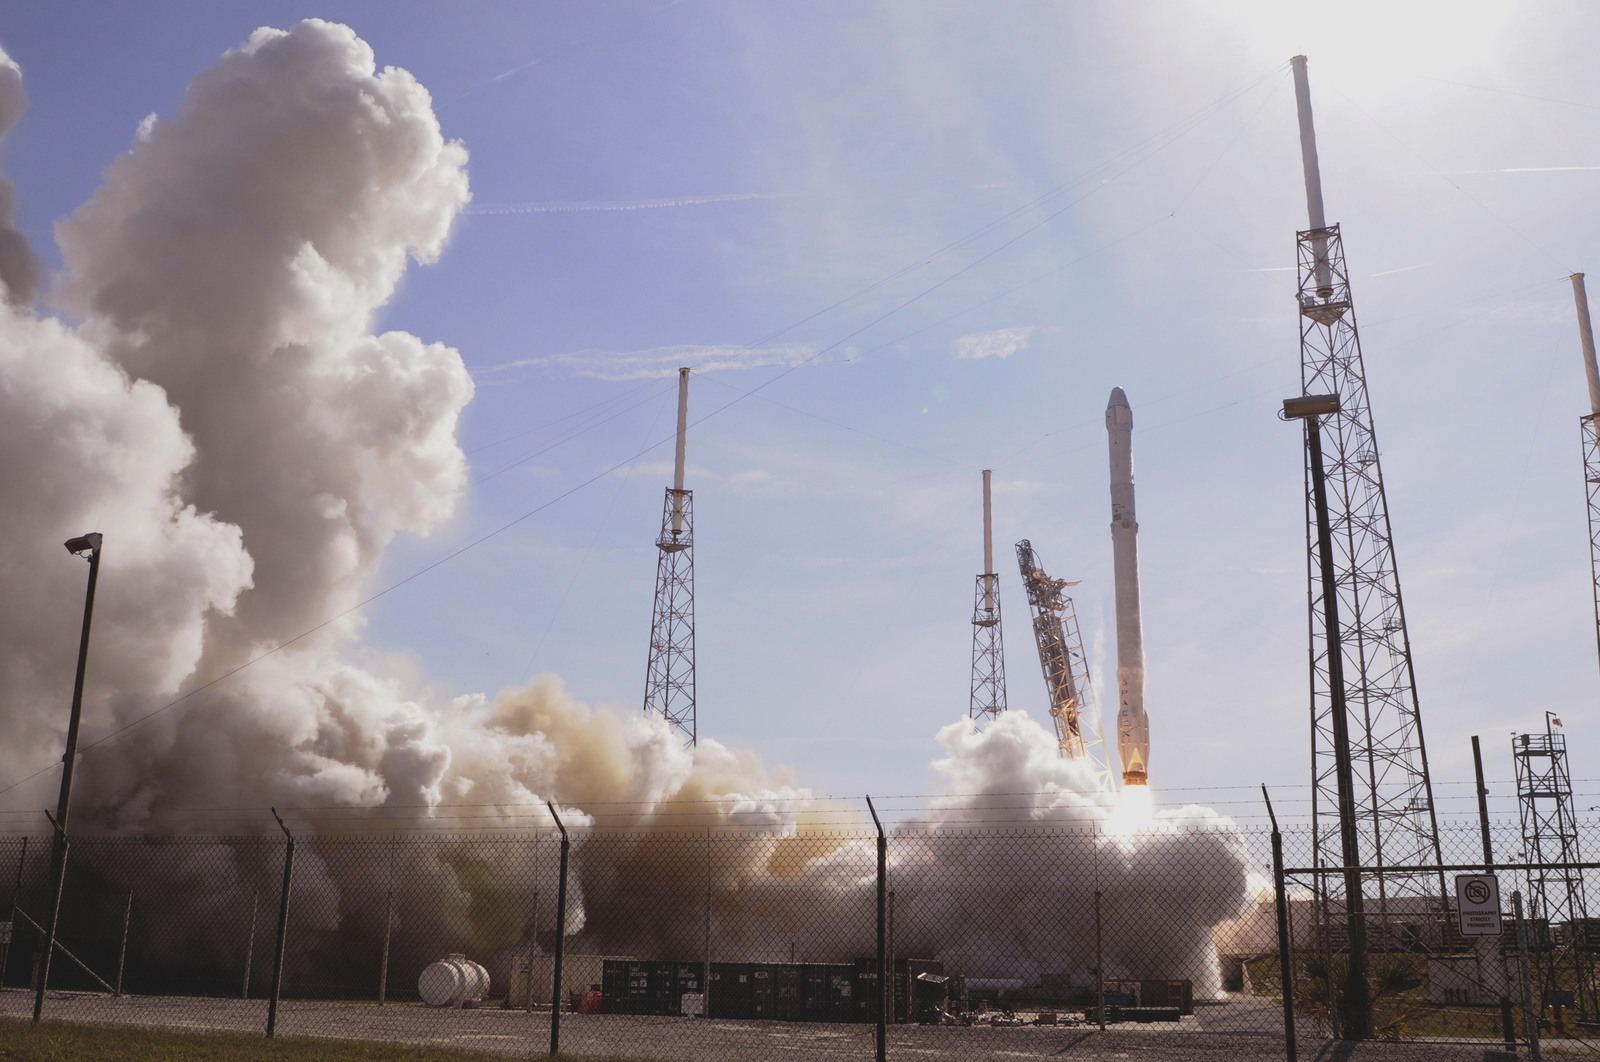 A SpaceX Falcon 9 rocket lifts off in Cape Canaveral Florida